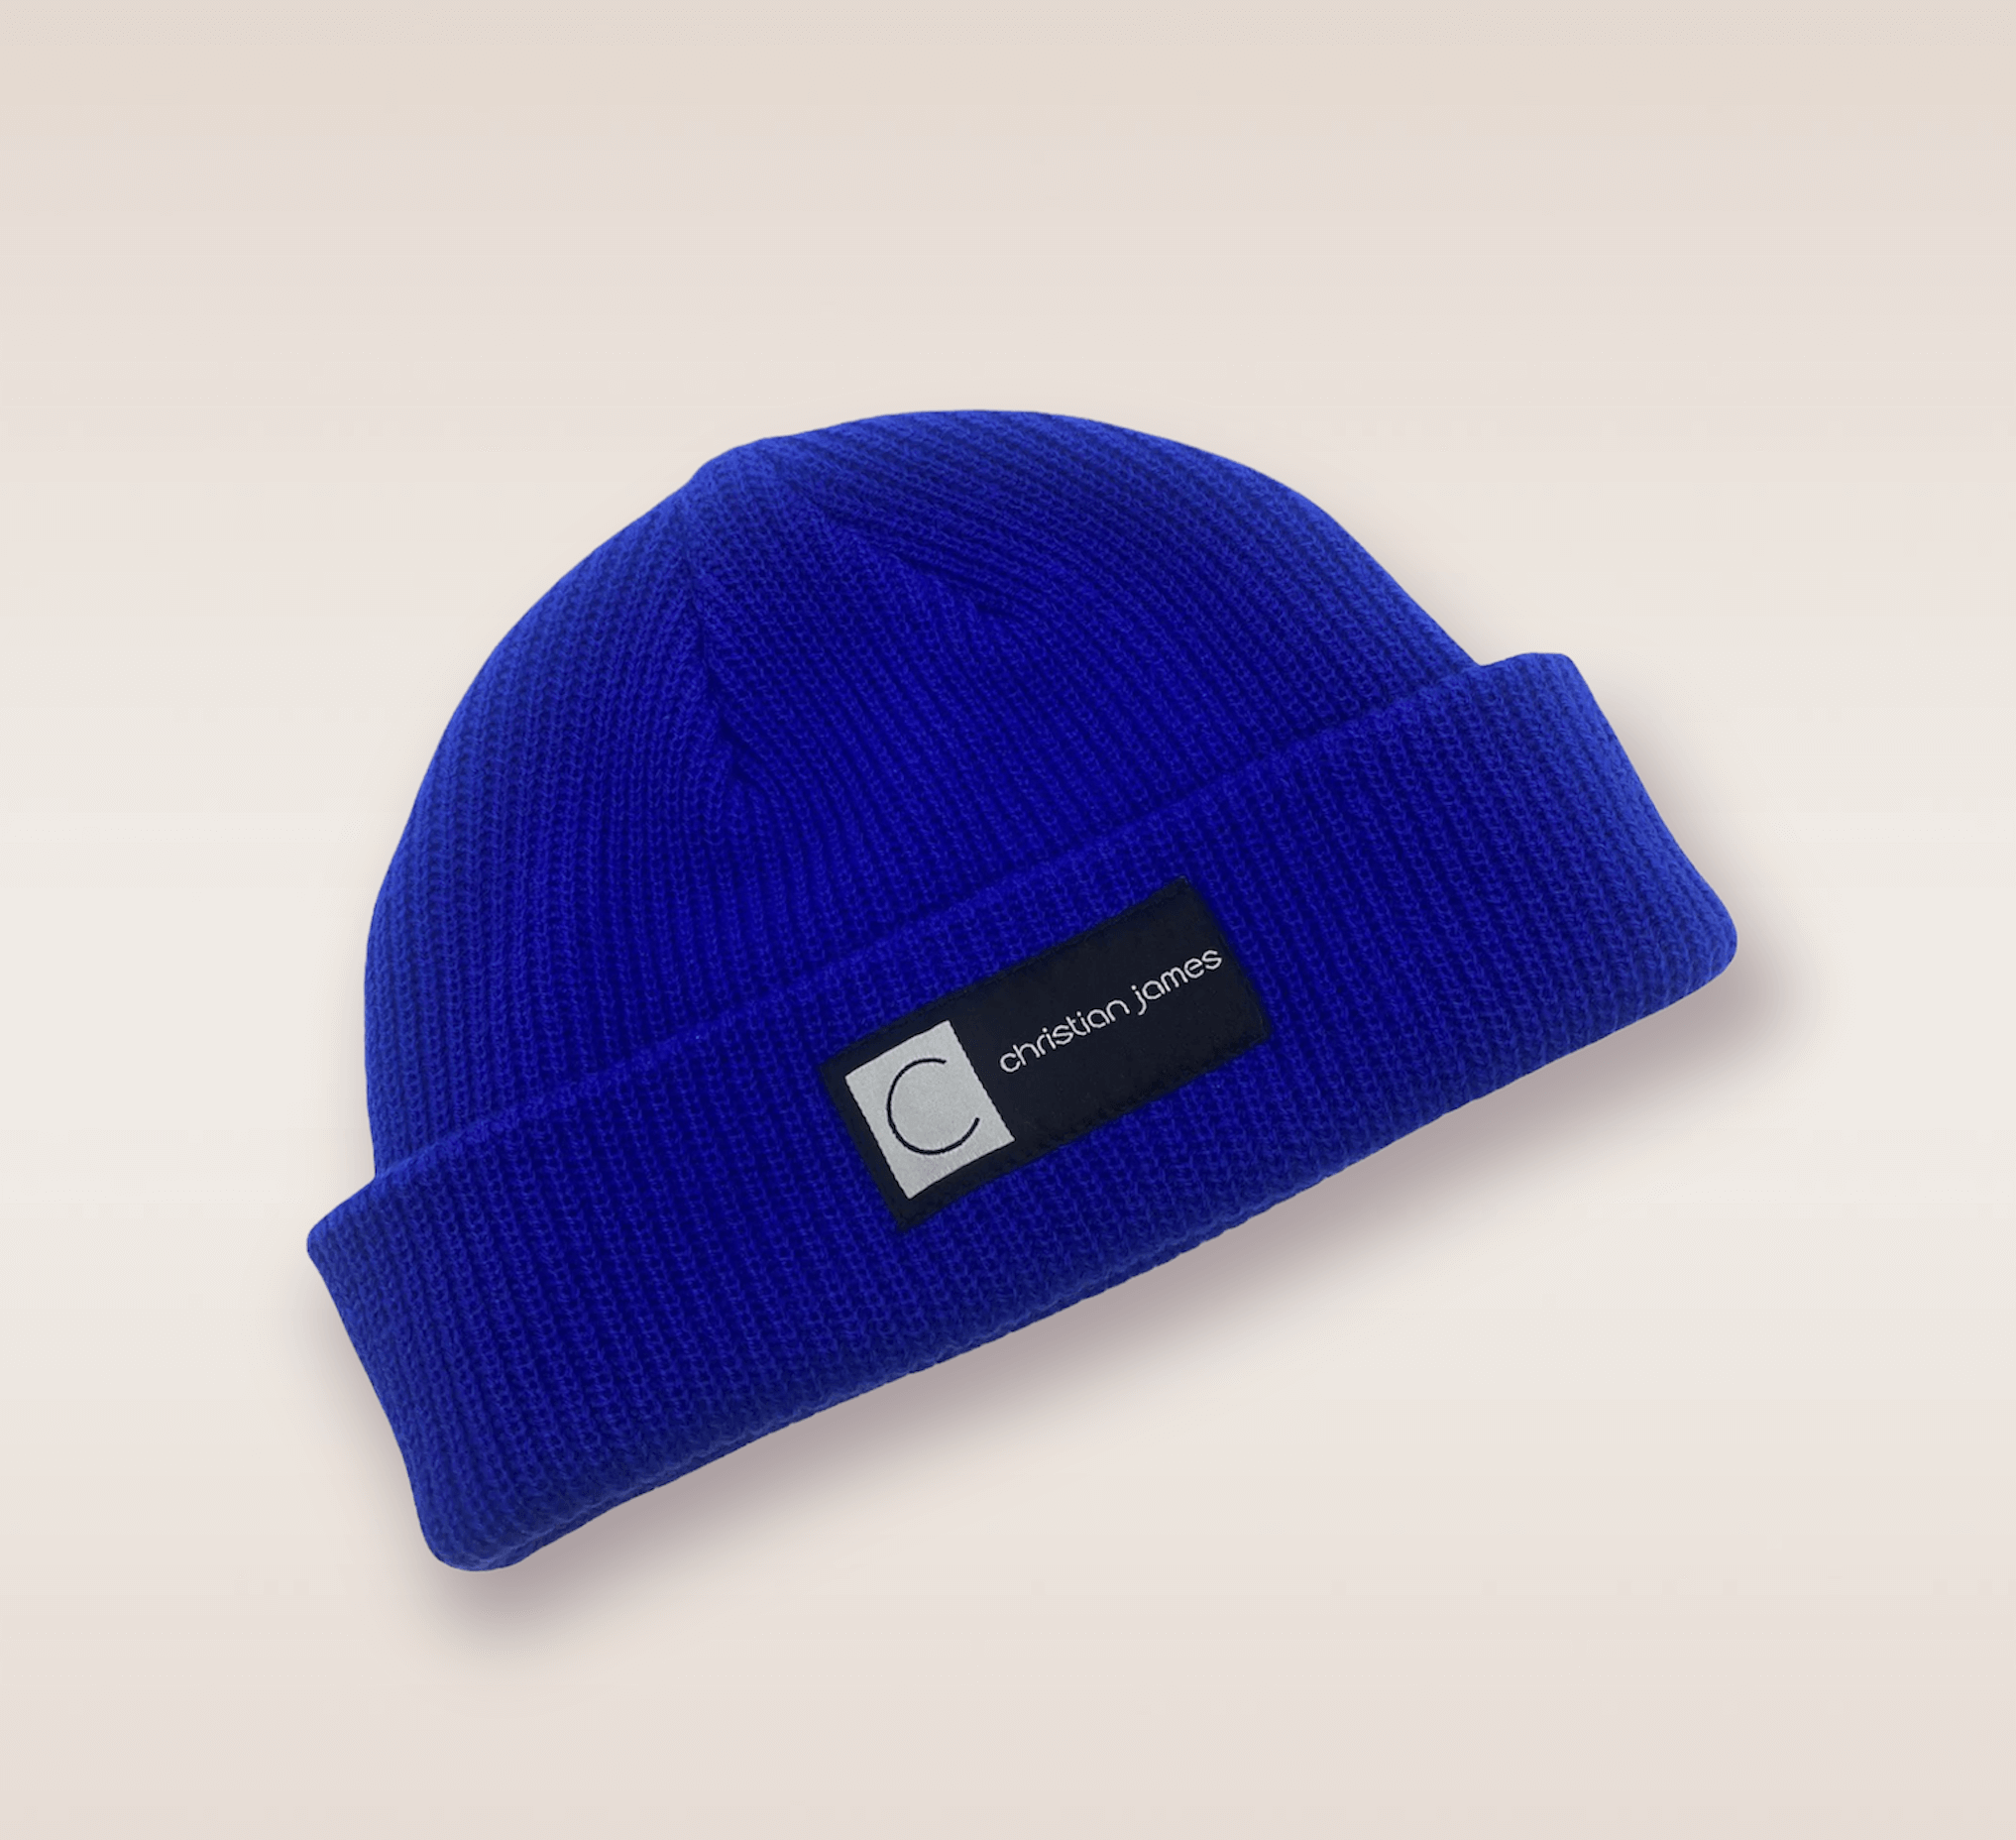 In this up-close shot, we are introduced to the Blue CJ beanie. A blue knit hat featuring an embroidered patch of the brand's acronym in black and white. 